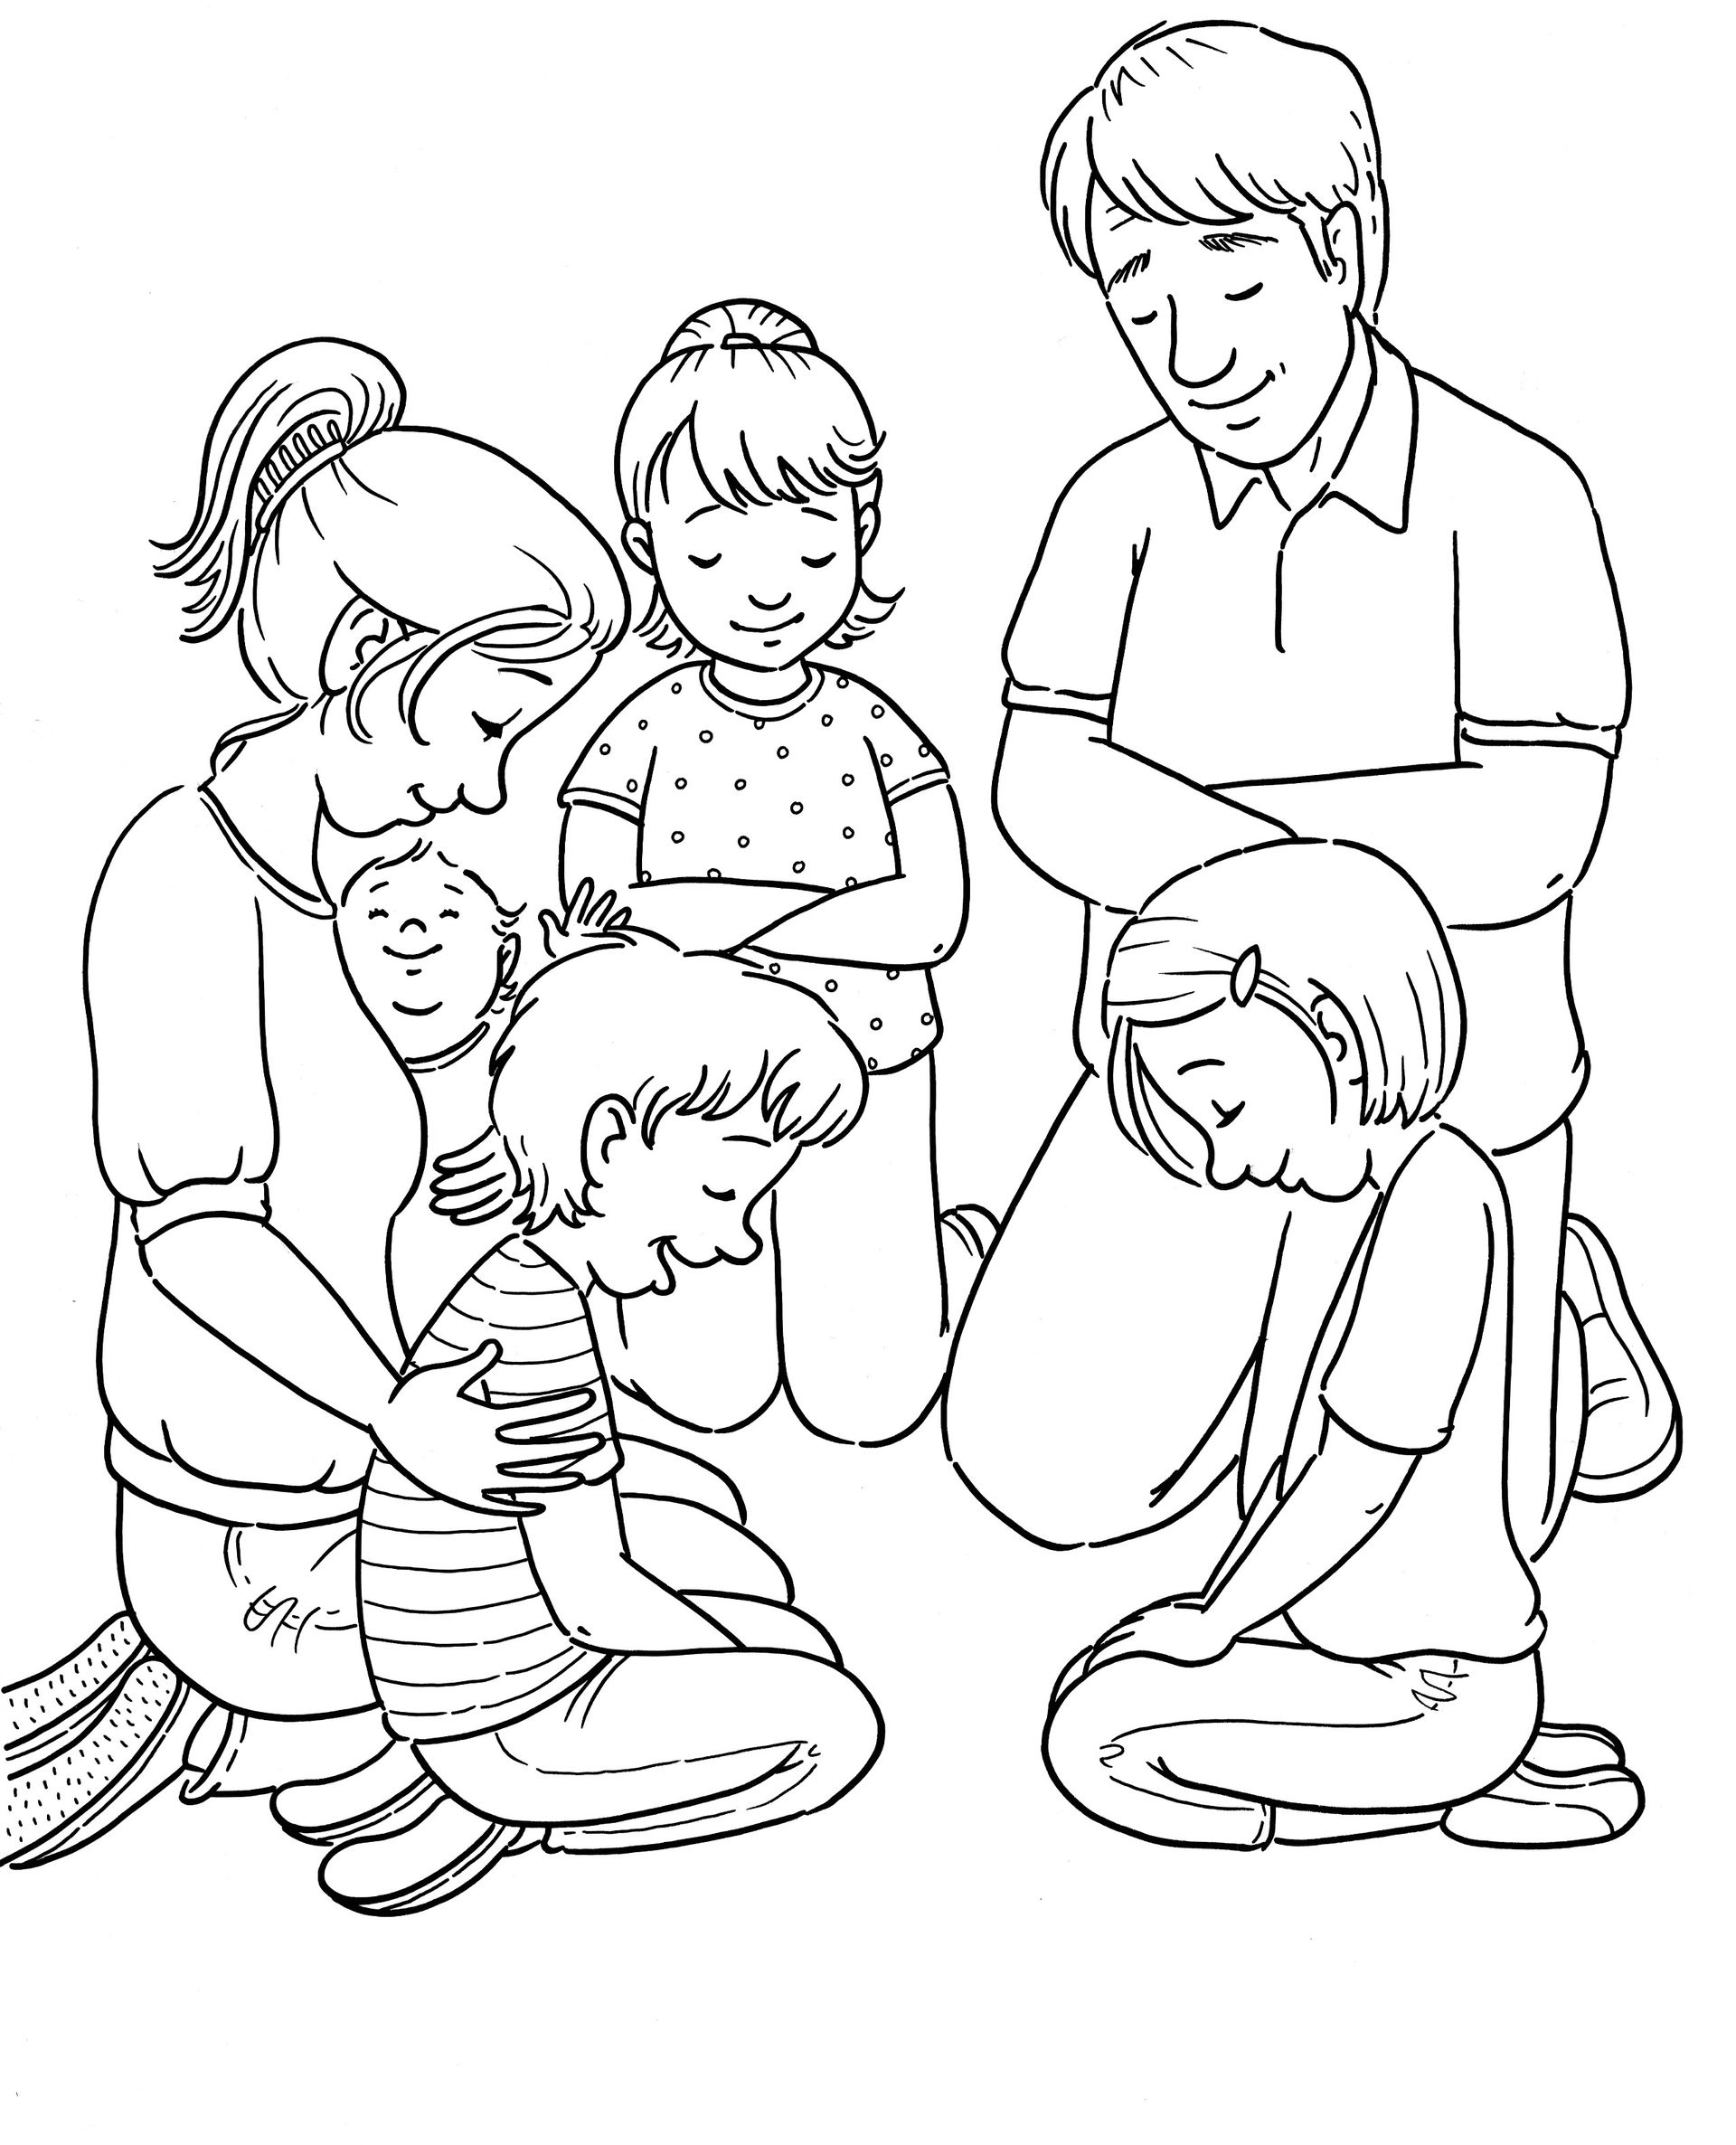 A family kneels in a circle and prays together.